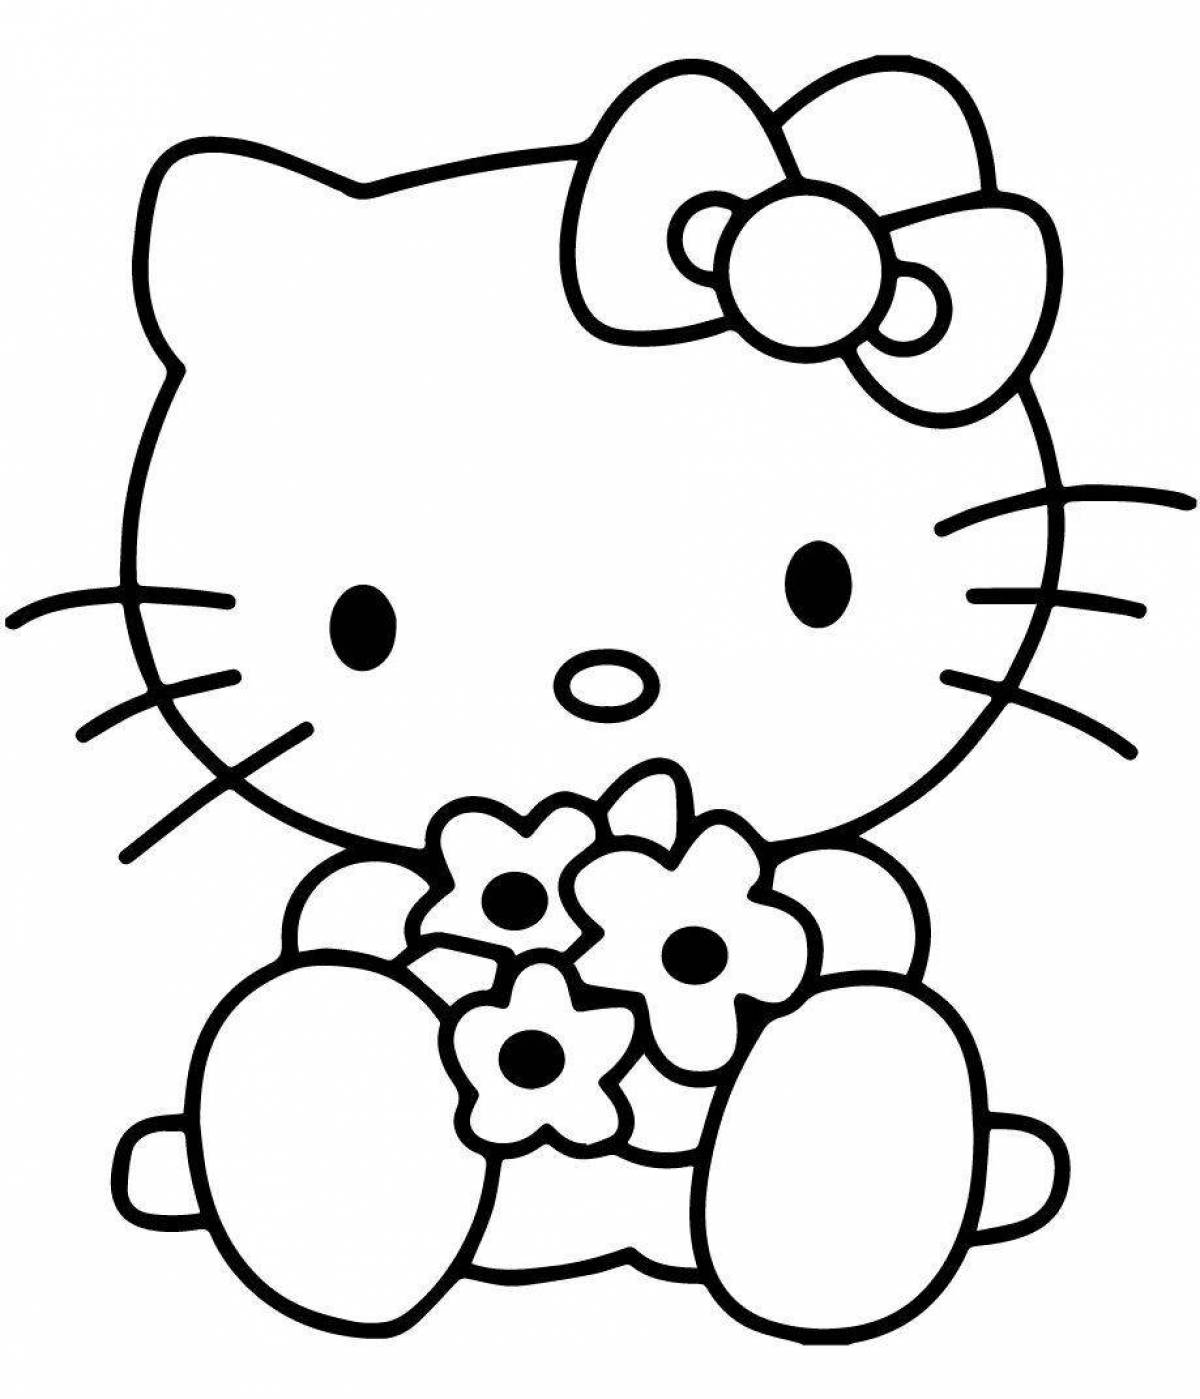 Fancy kitty coloring book for kids